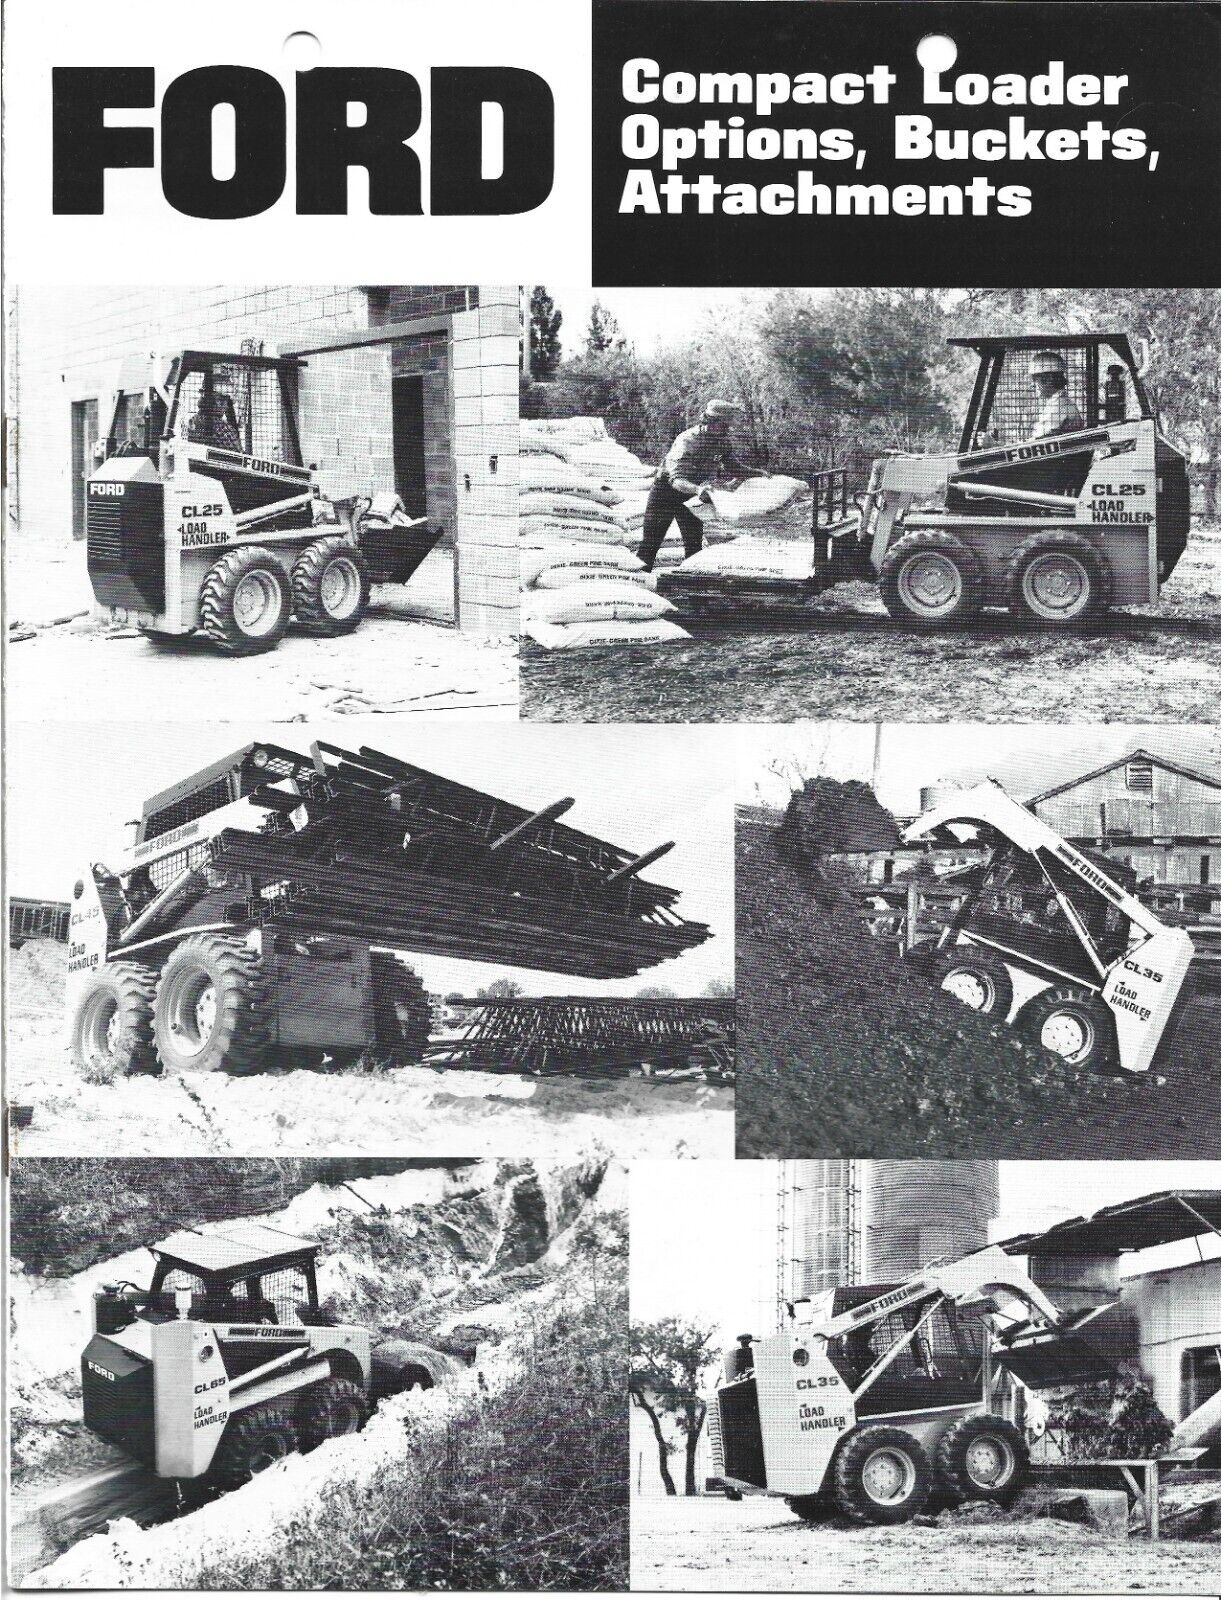 Original Ford Compact Loader Options Buckets Attachments Sales Brochure AD6056A